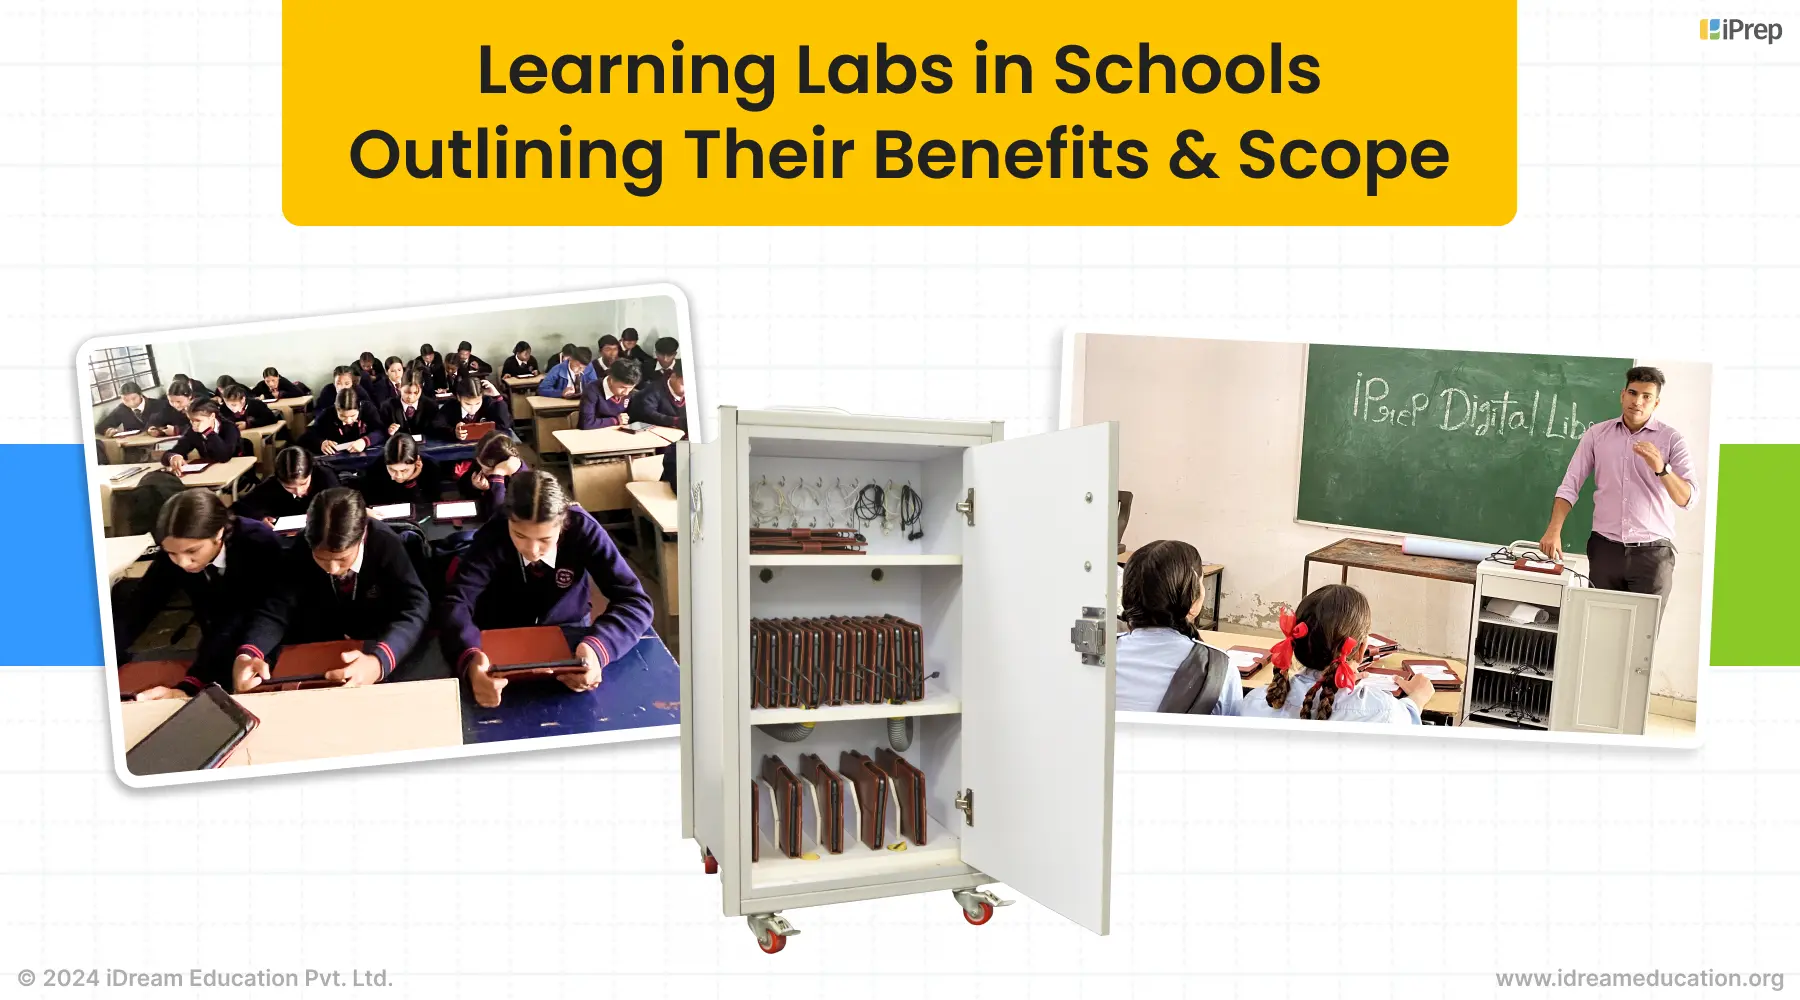 A visual representation of how learning labs can benefit schools